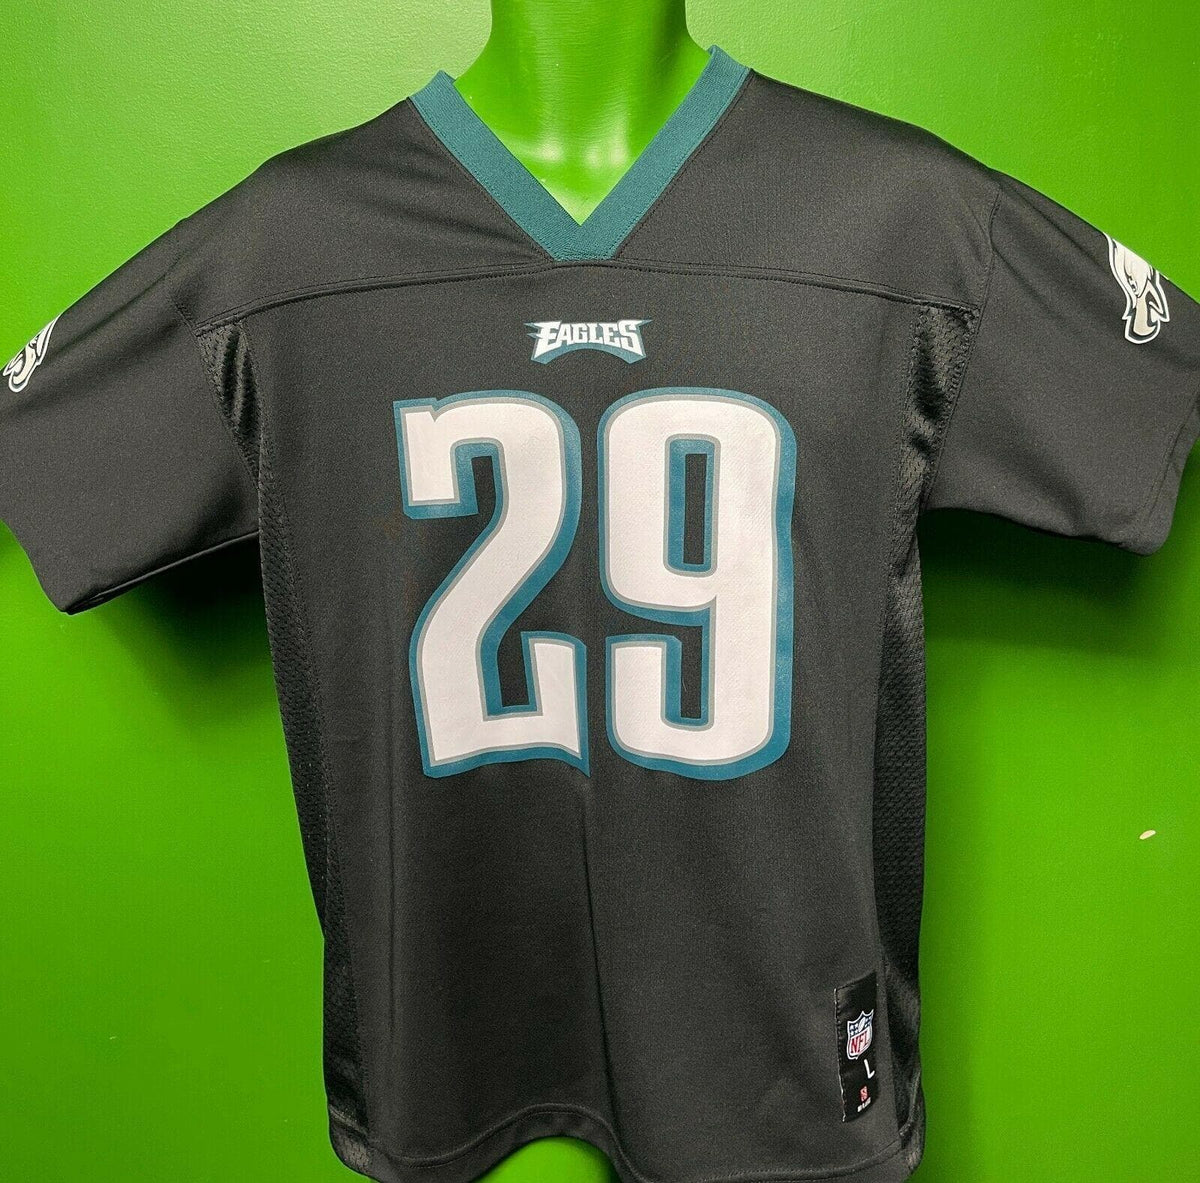 NFL Philadelphia Eagles DeMarco Murray #29 Jersey Youth Large 14-16